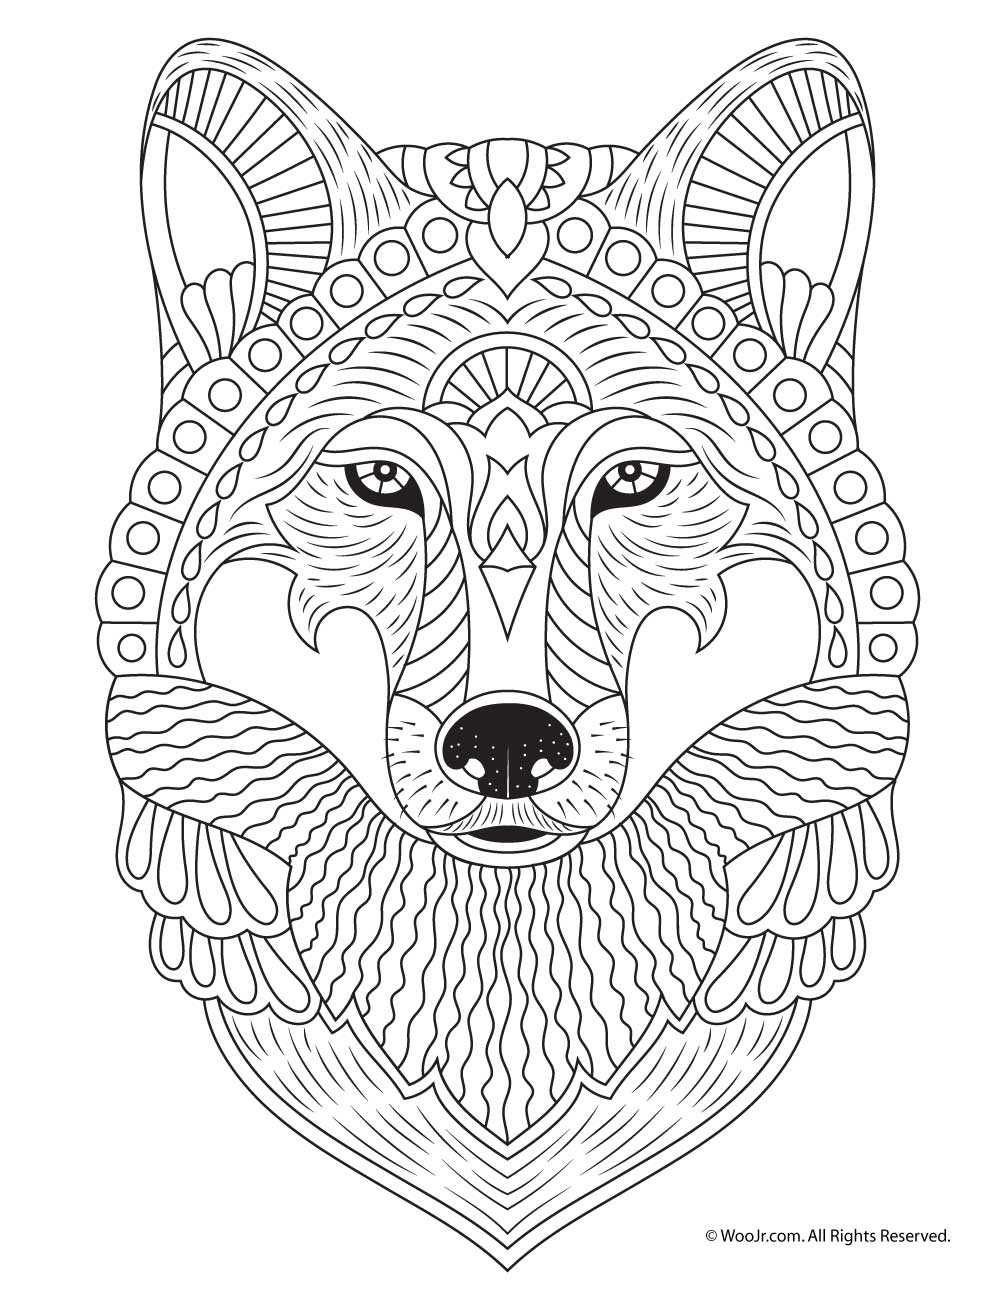 Wolf Adult Coloring Page | Woo! Jr. Kids Activities : Children's Publishing